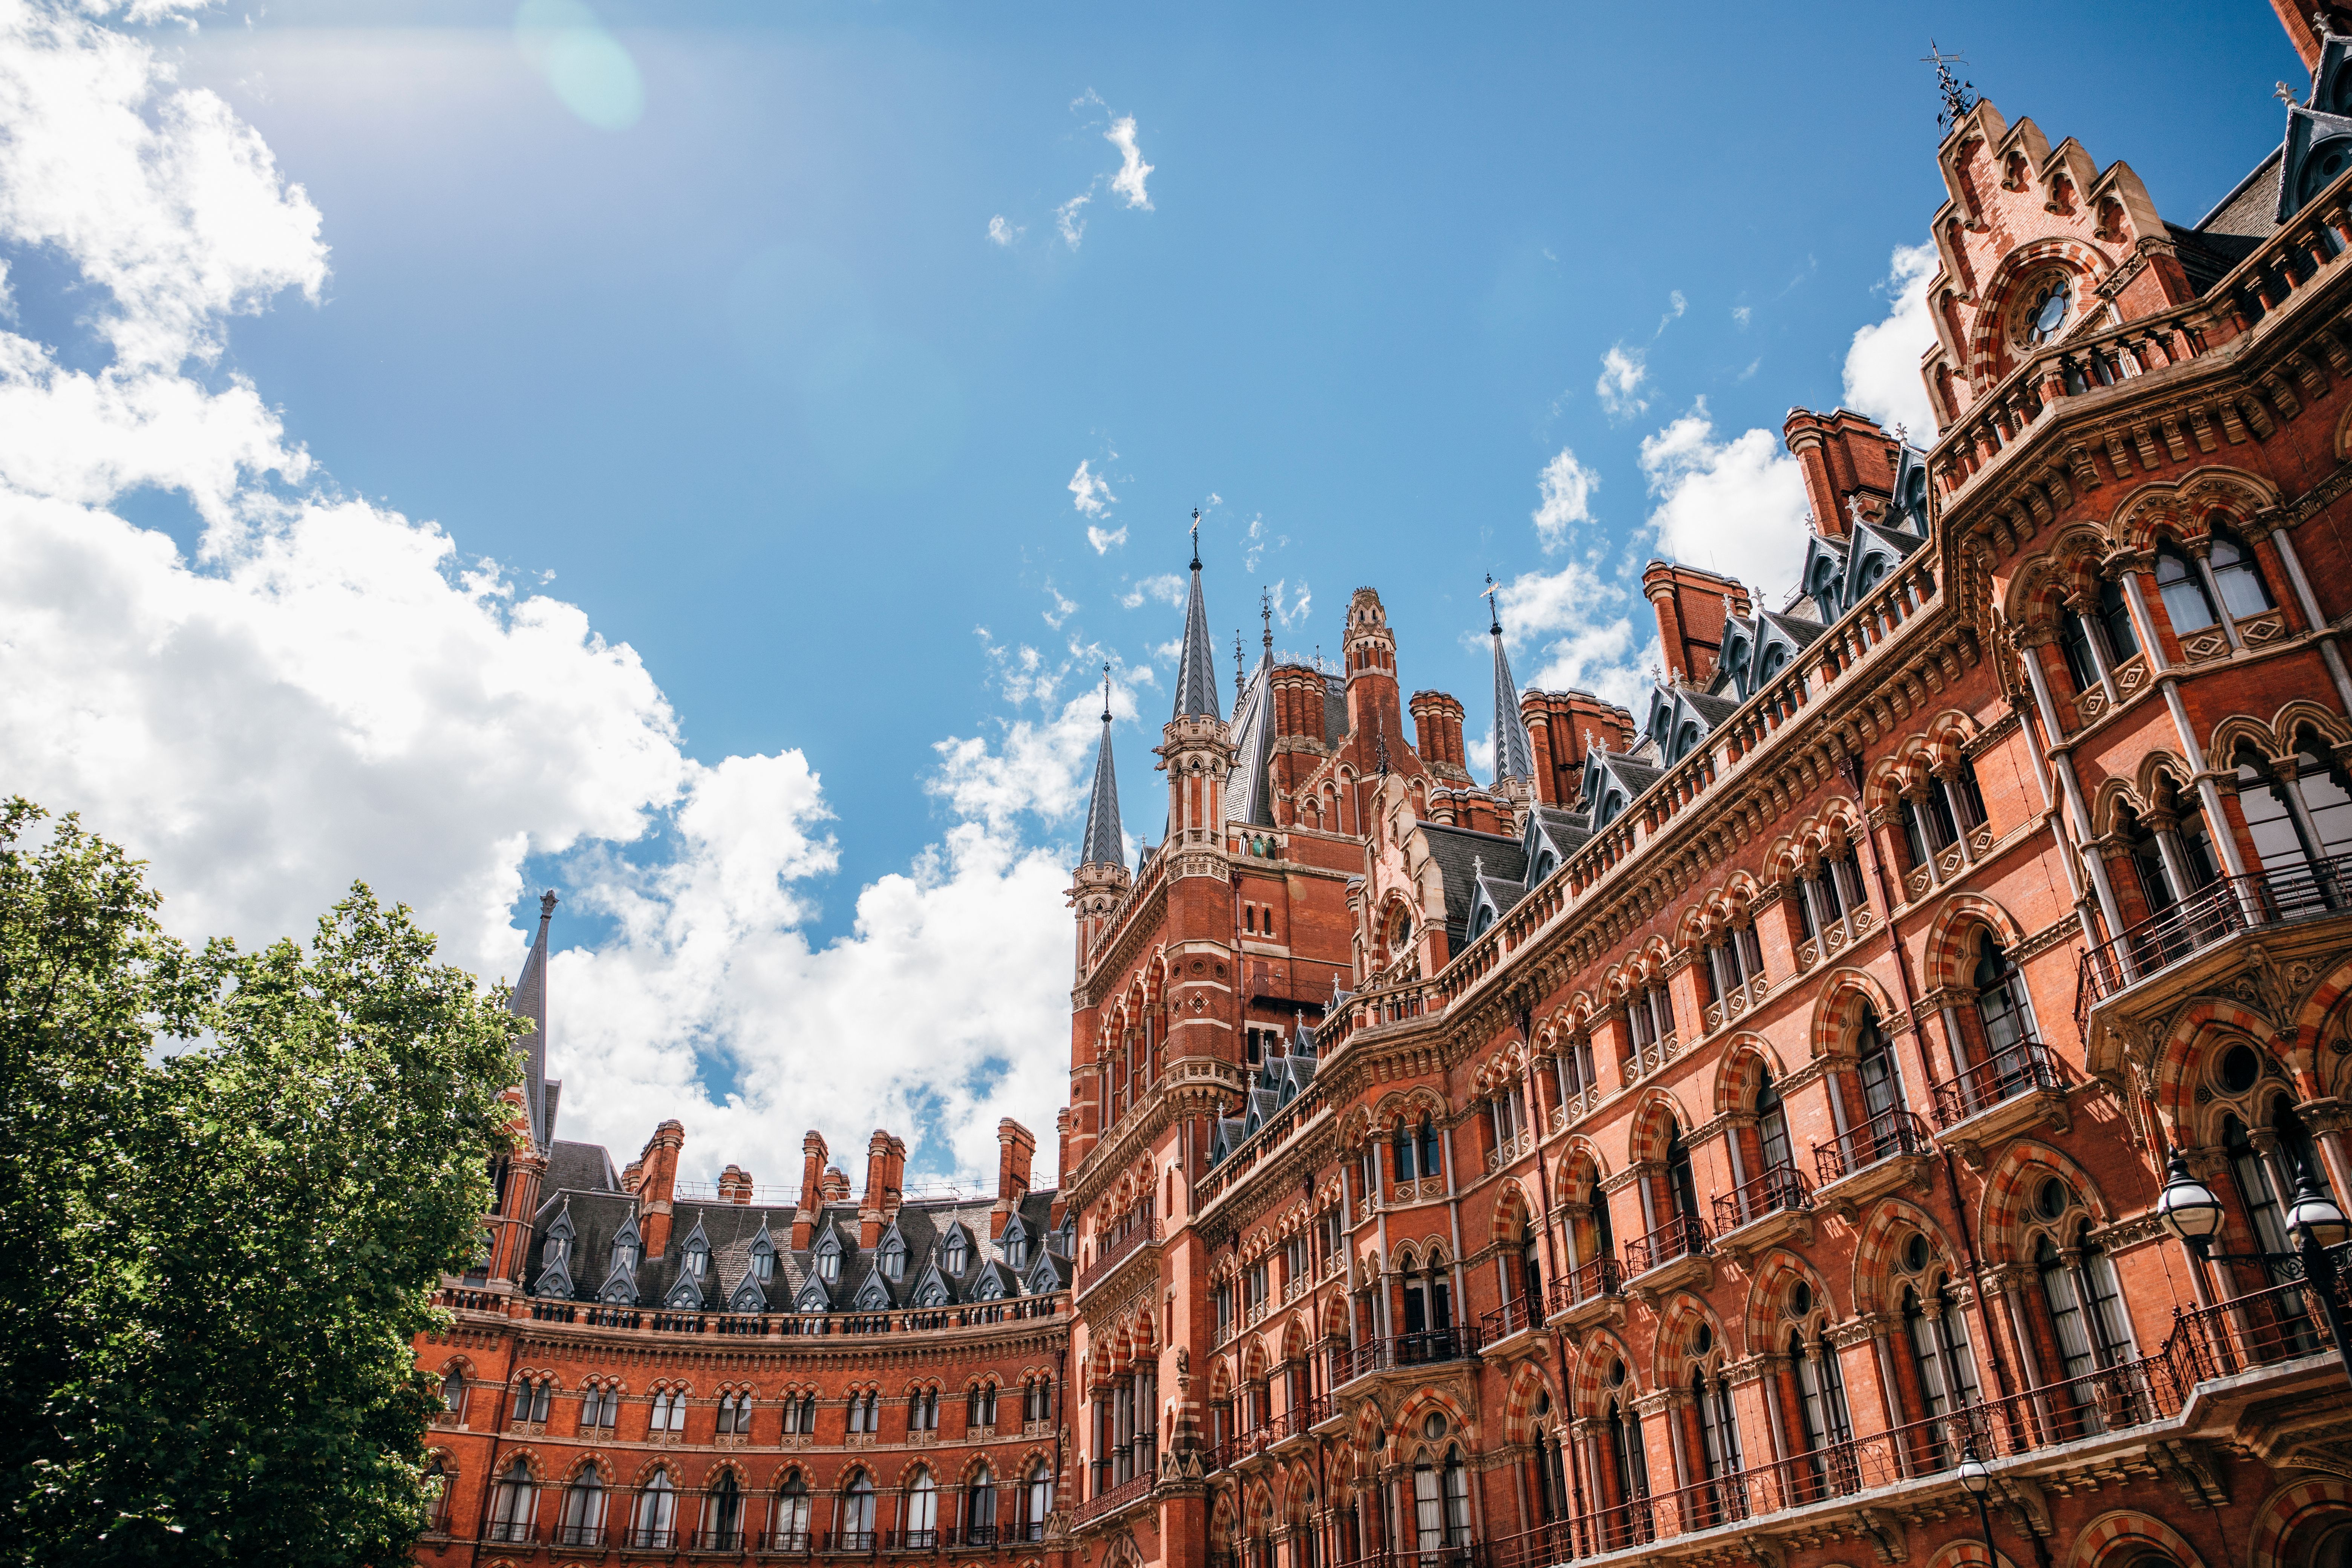 Exterior of St Pancras International train station in London